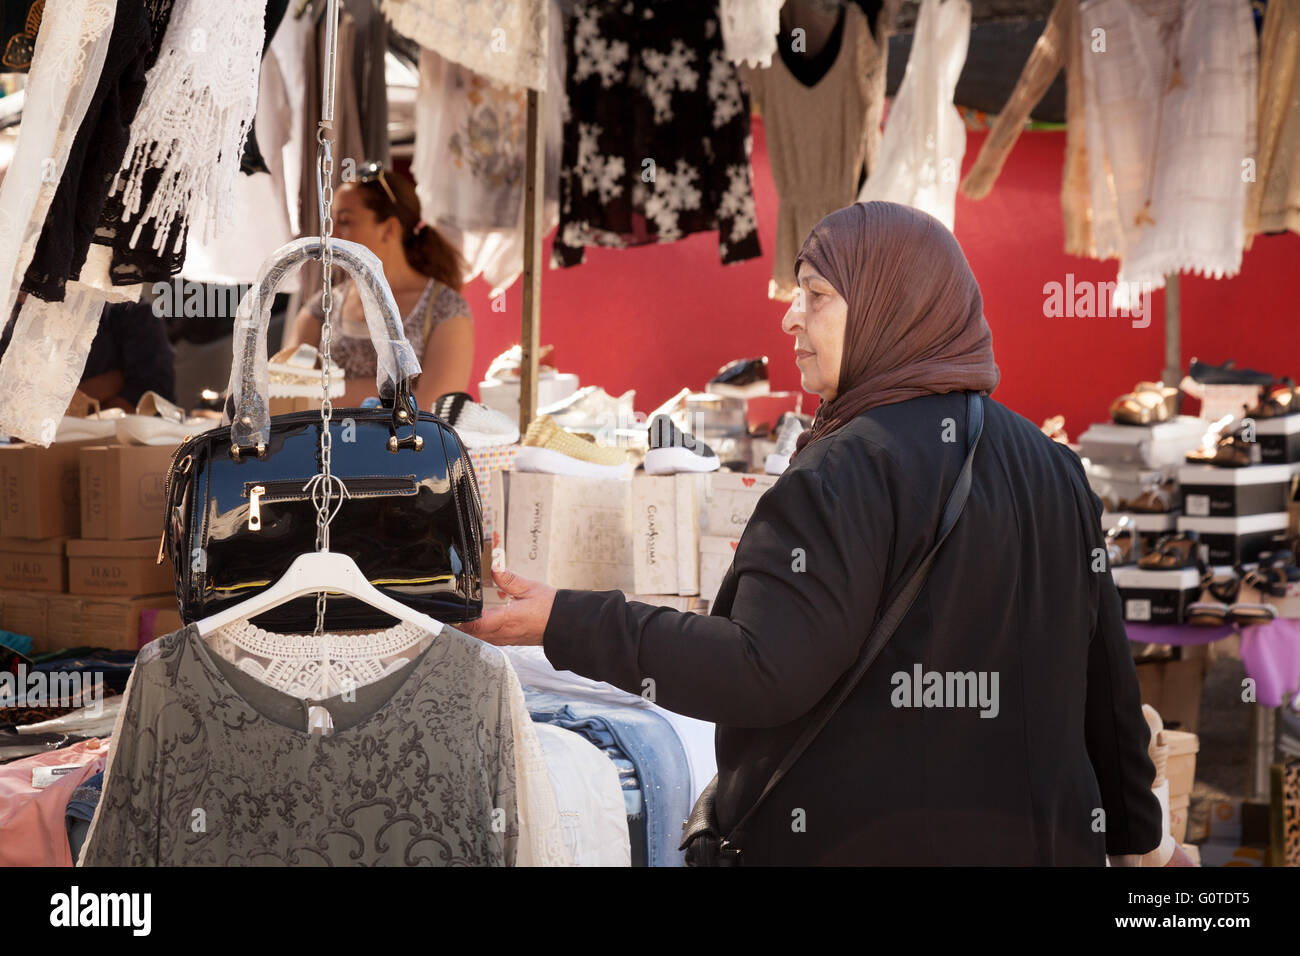 A muslim woman shopping for clothes, Marbella Market, Andalusia, Spain, Europe Stock Photo